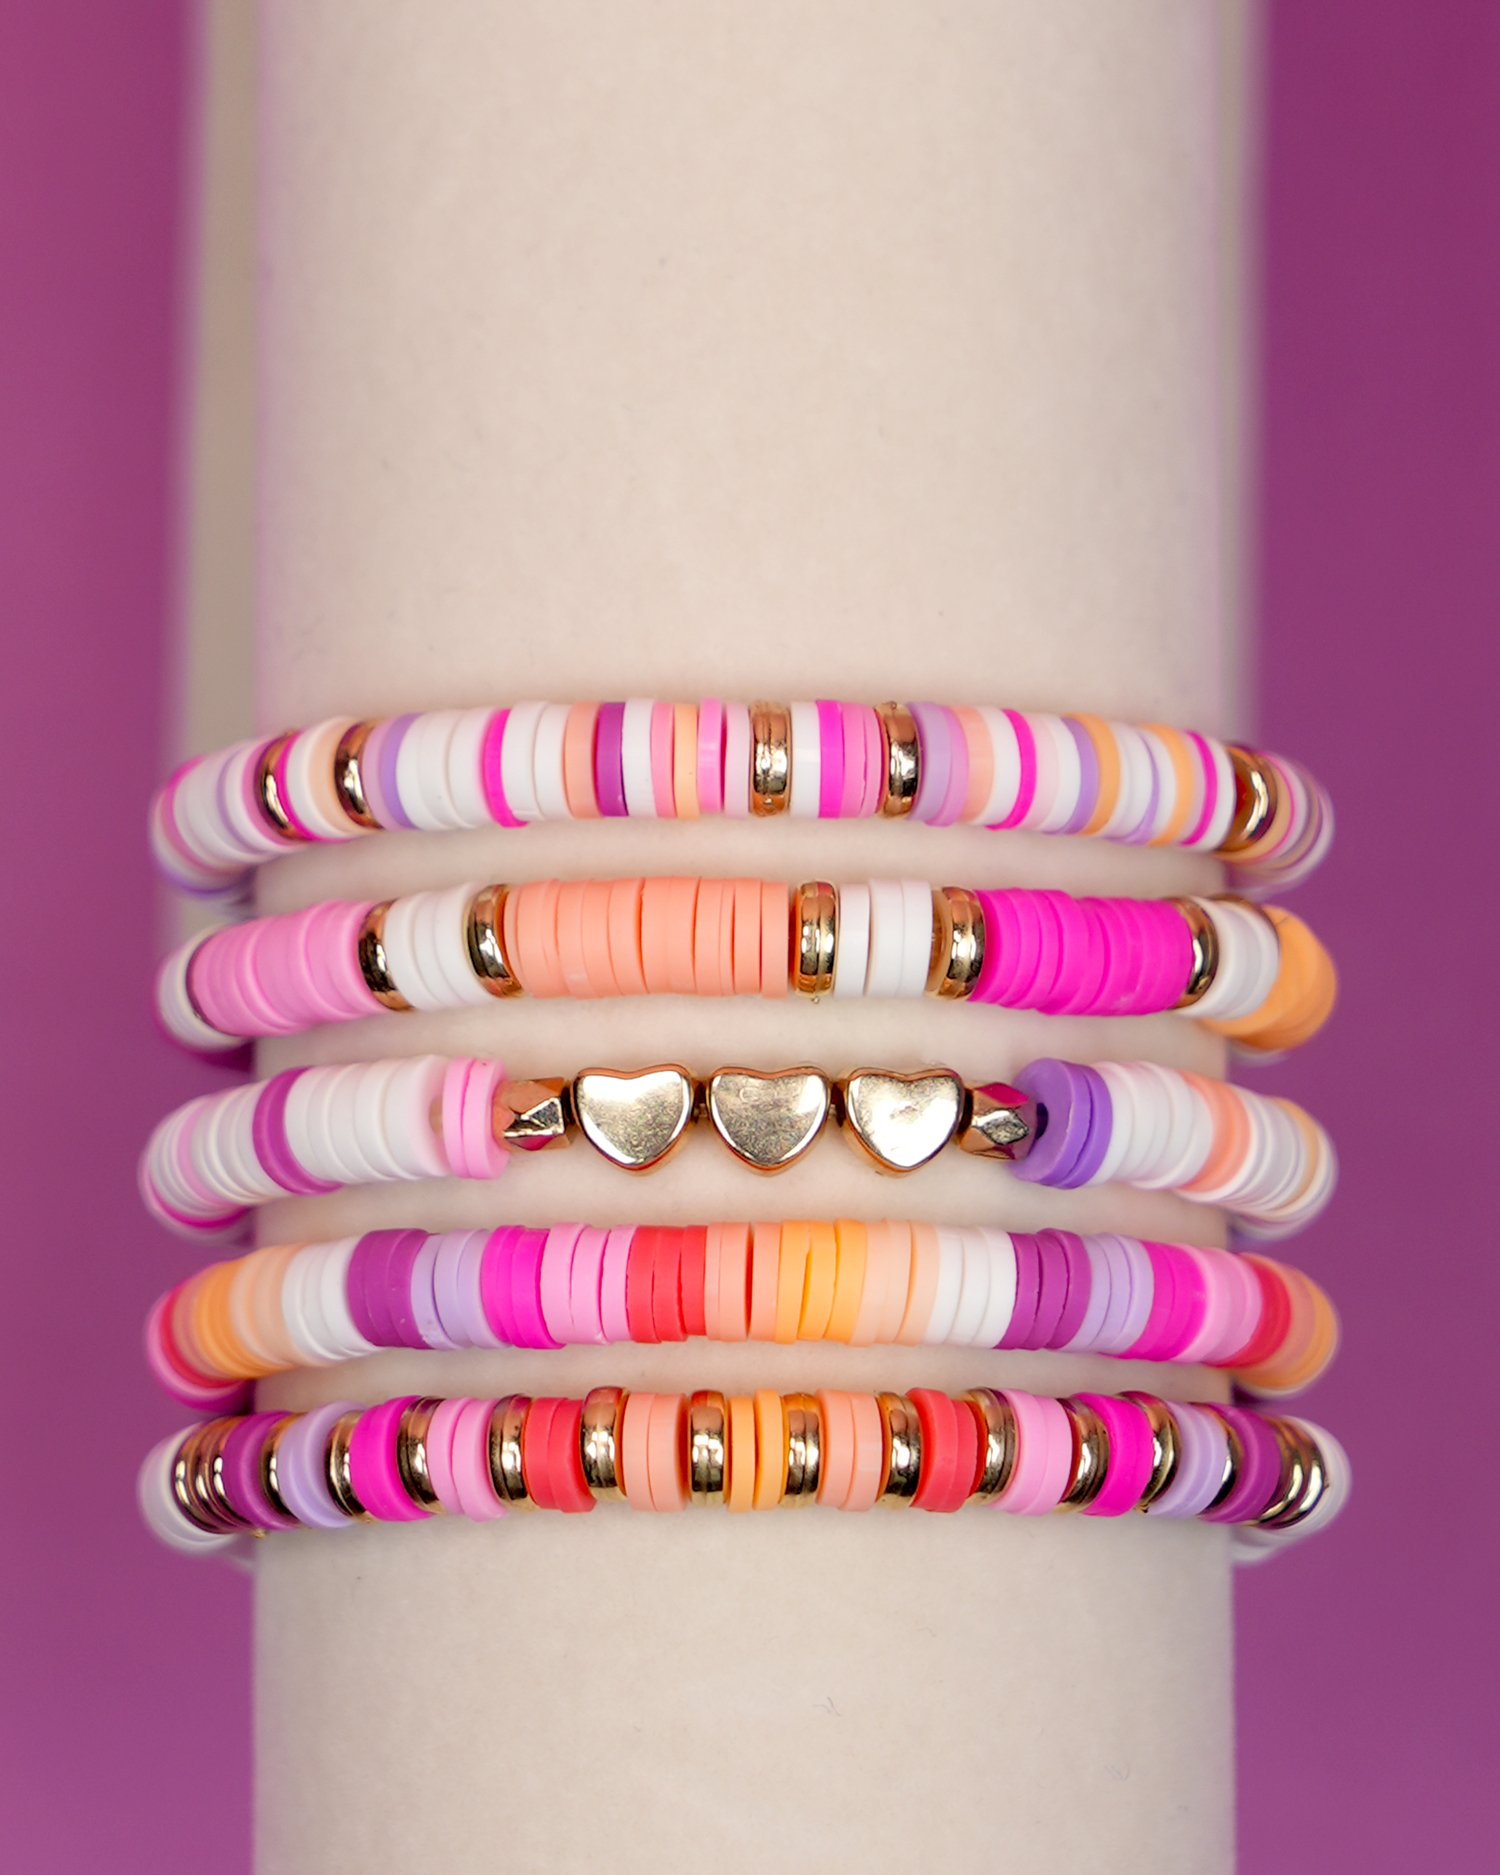 Close up of heishi clay bead bracelets - colorful preppy clay bead bracelet set on display stand on purple background